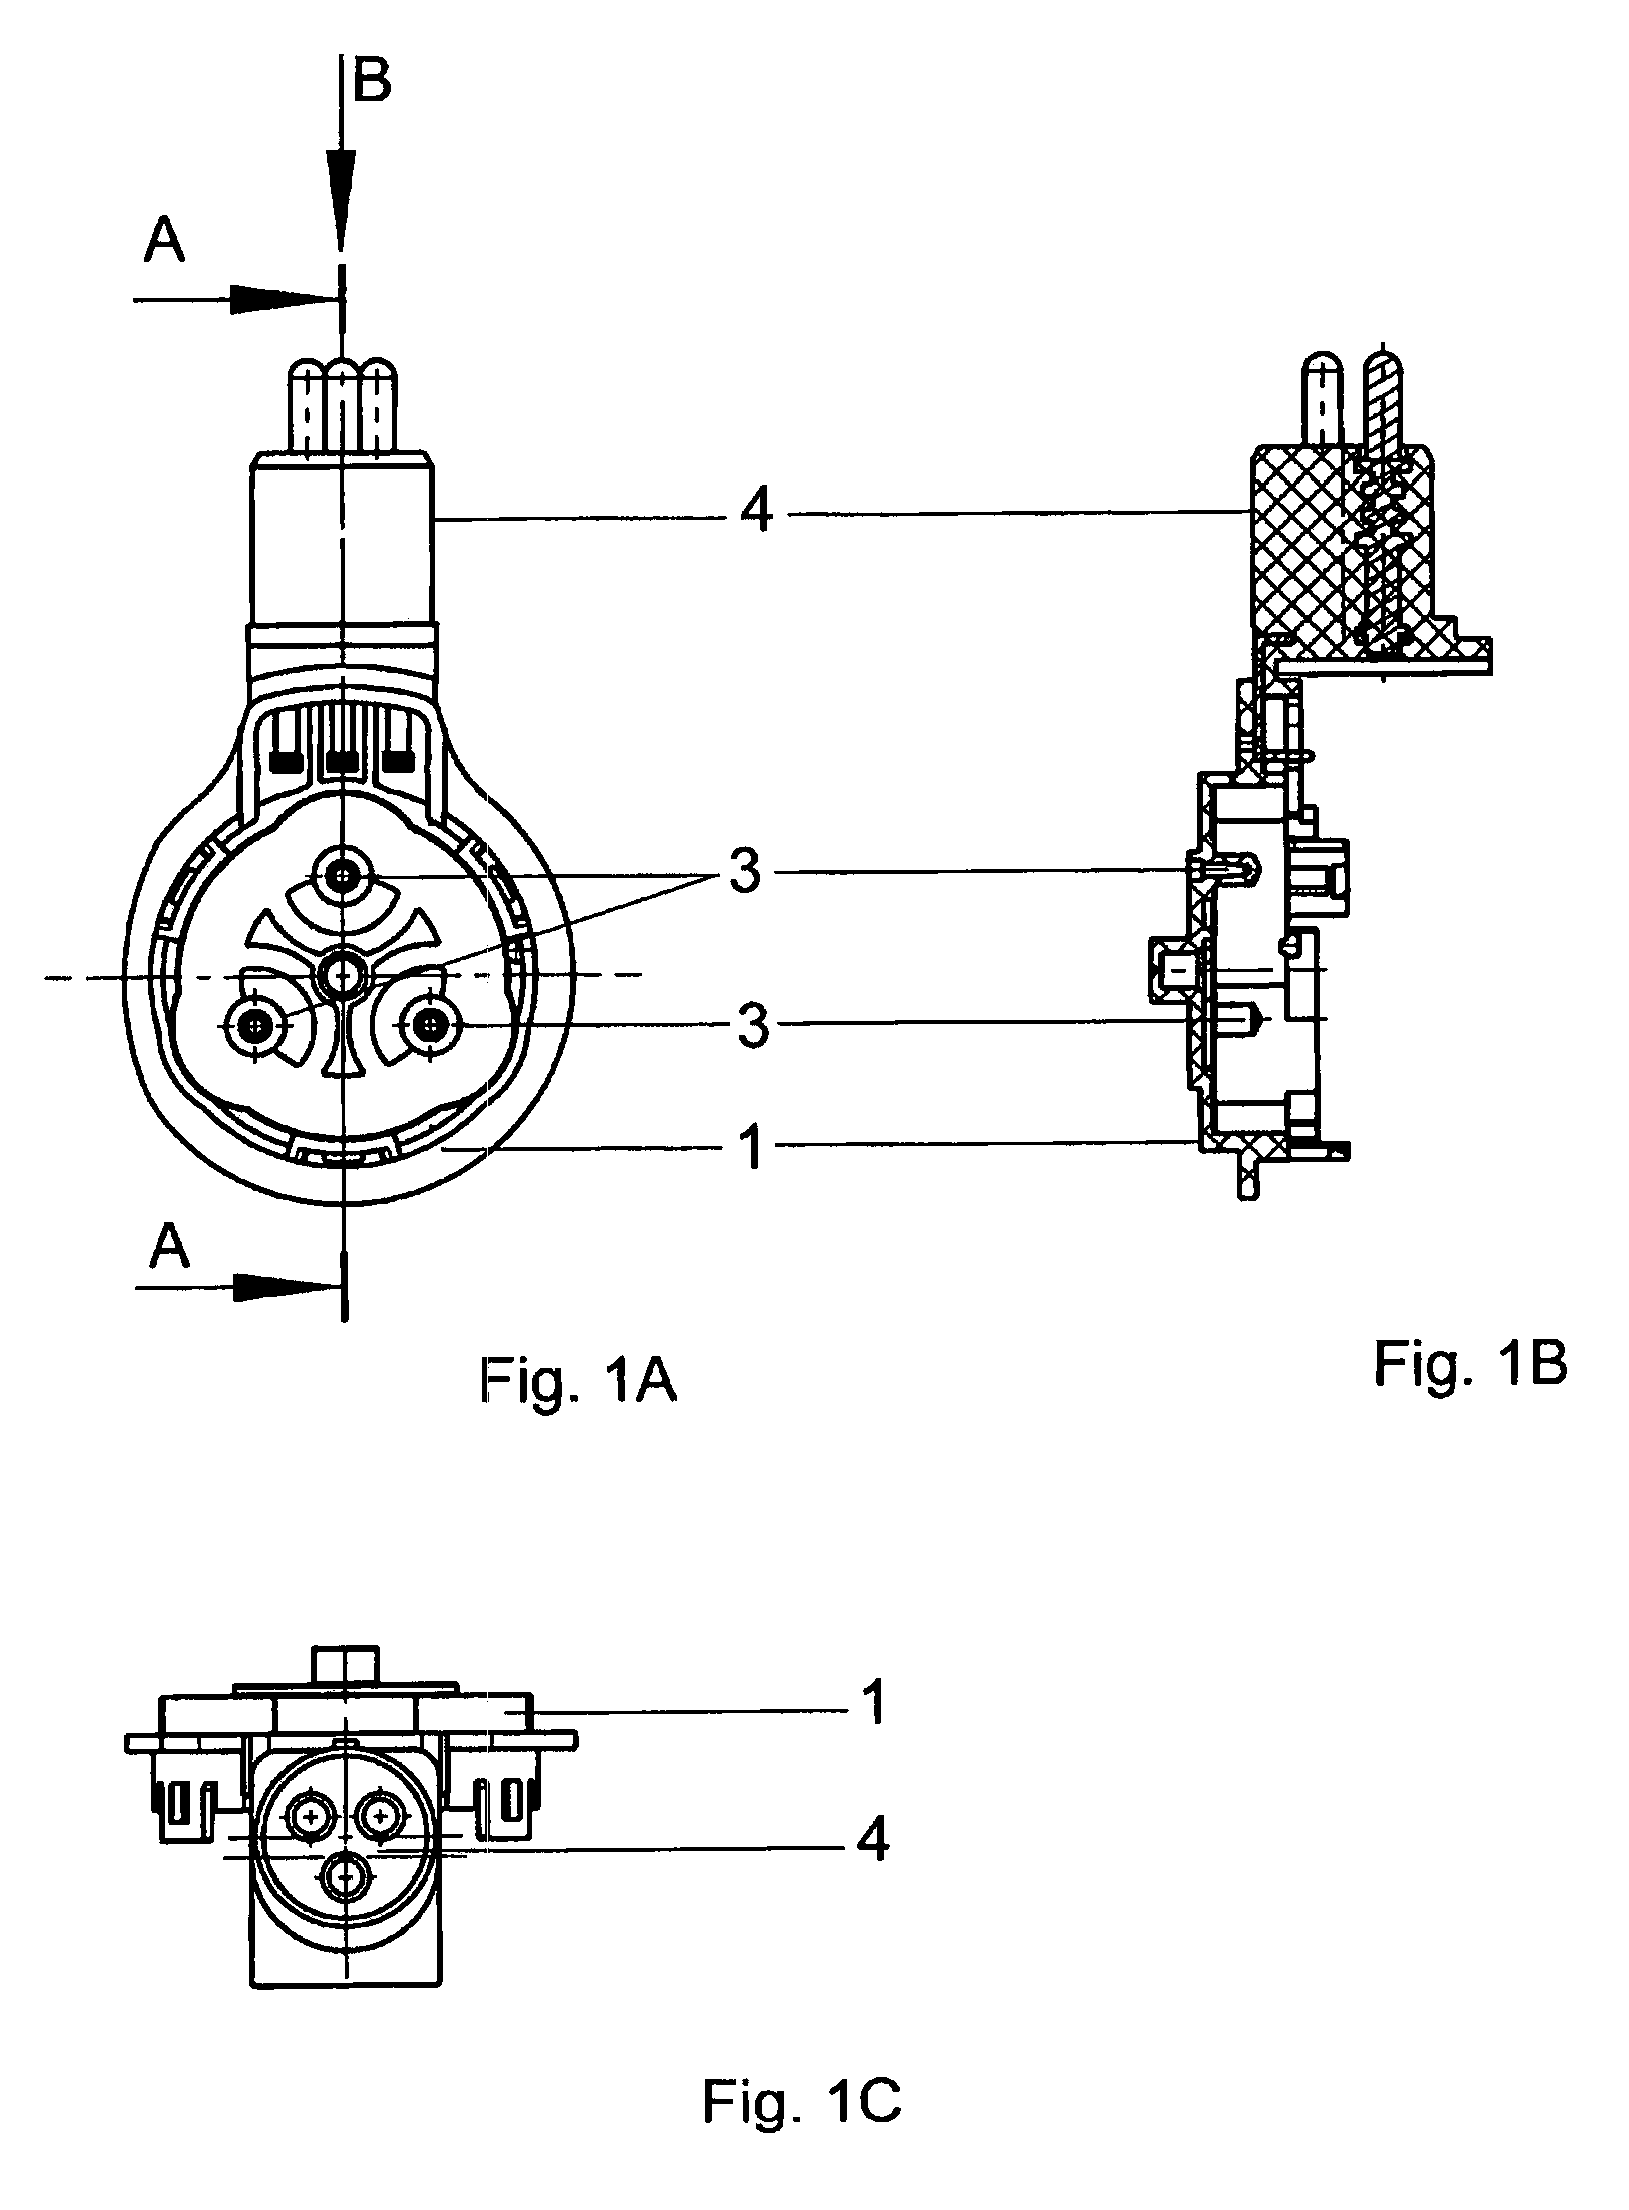 Method for producing a plastic housing comprising an incorporated guide and/or bearing for mechanical components